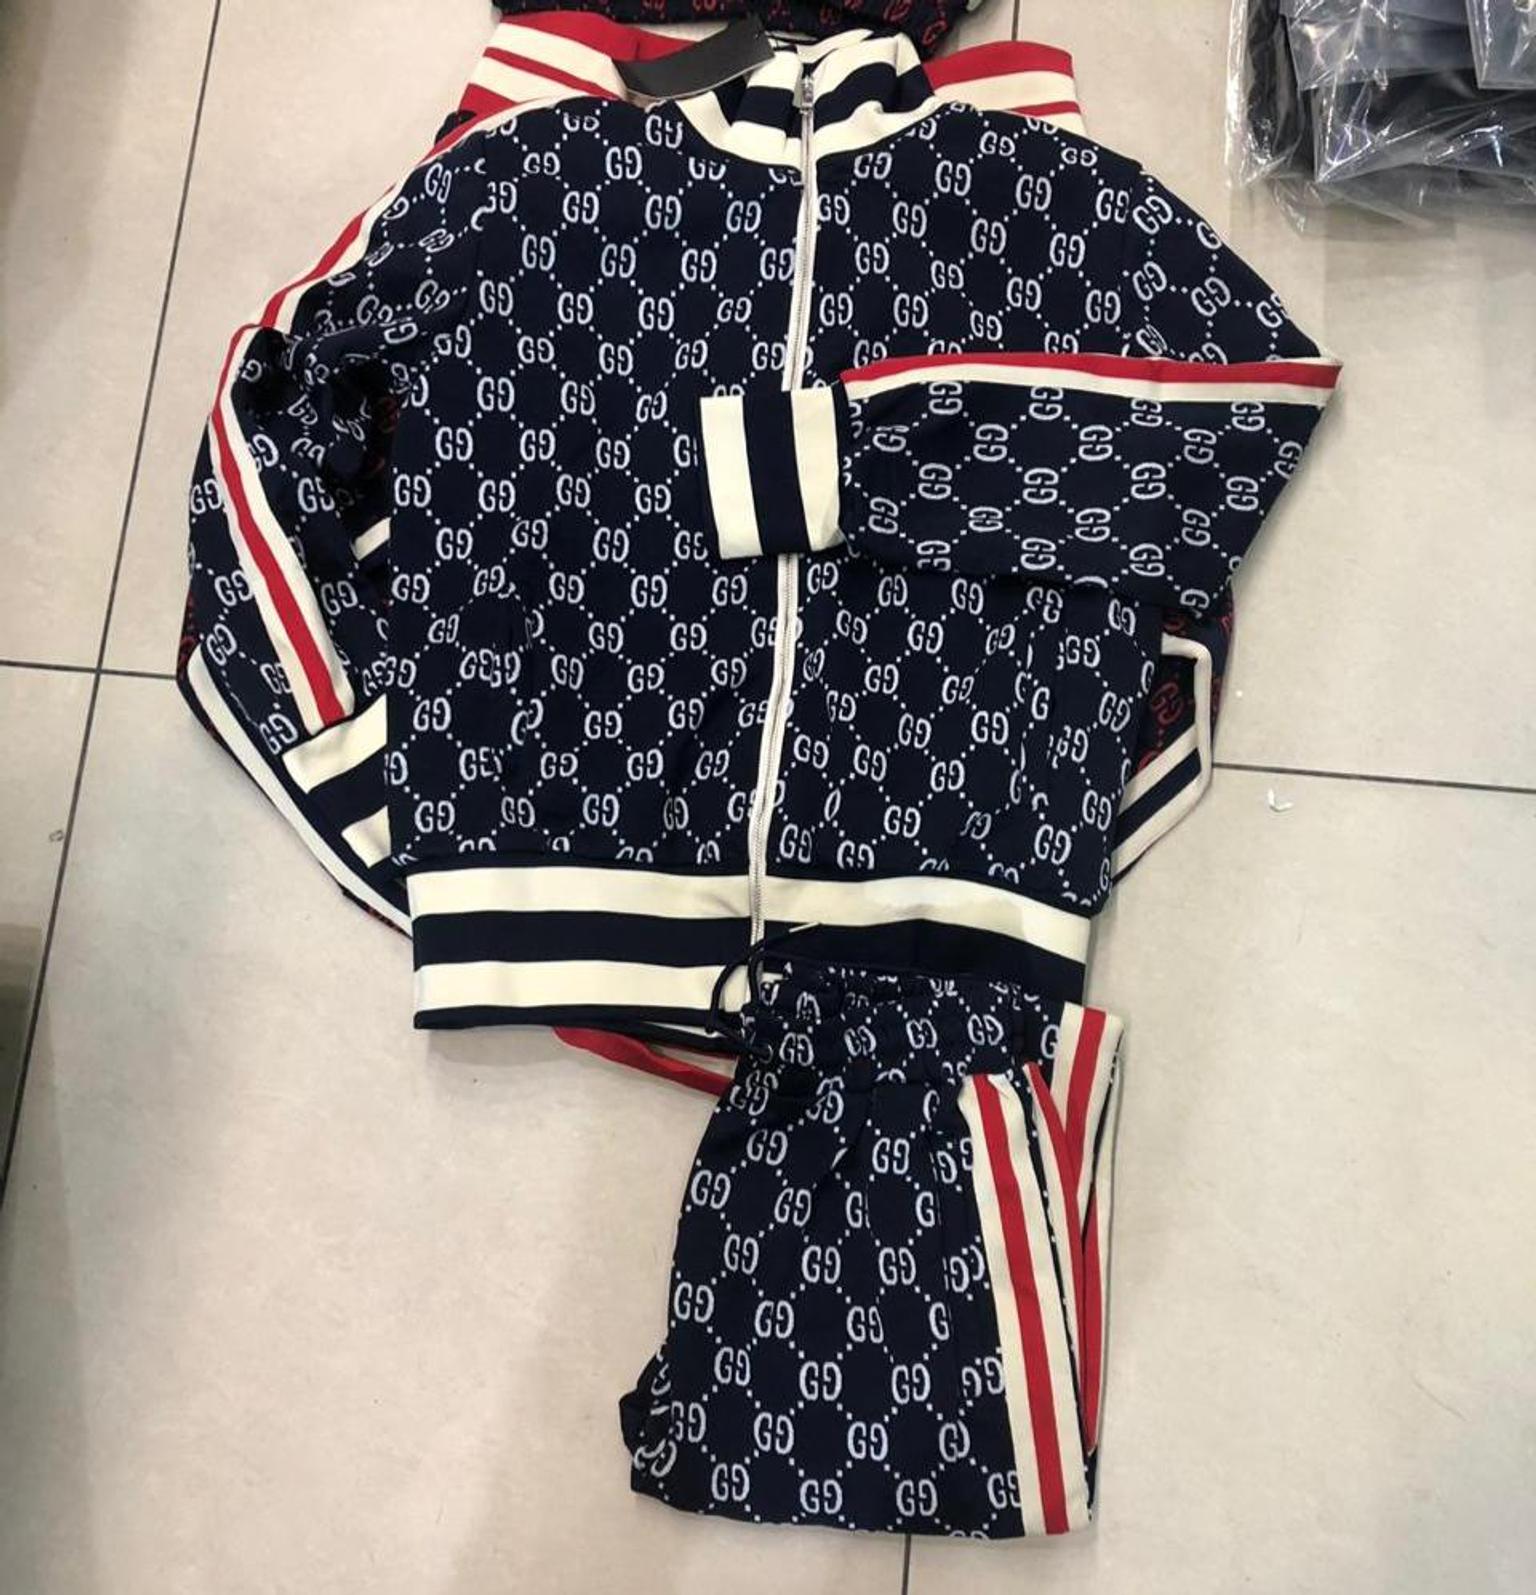 gucci tracksuit shorts